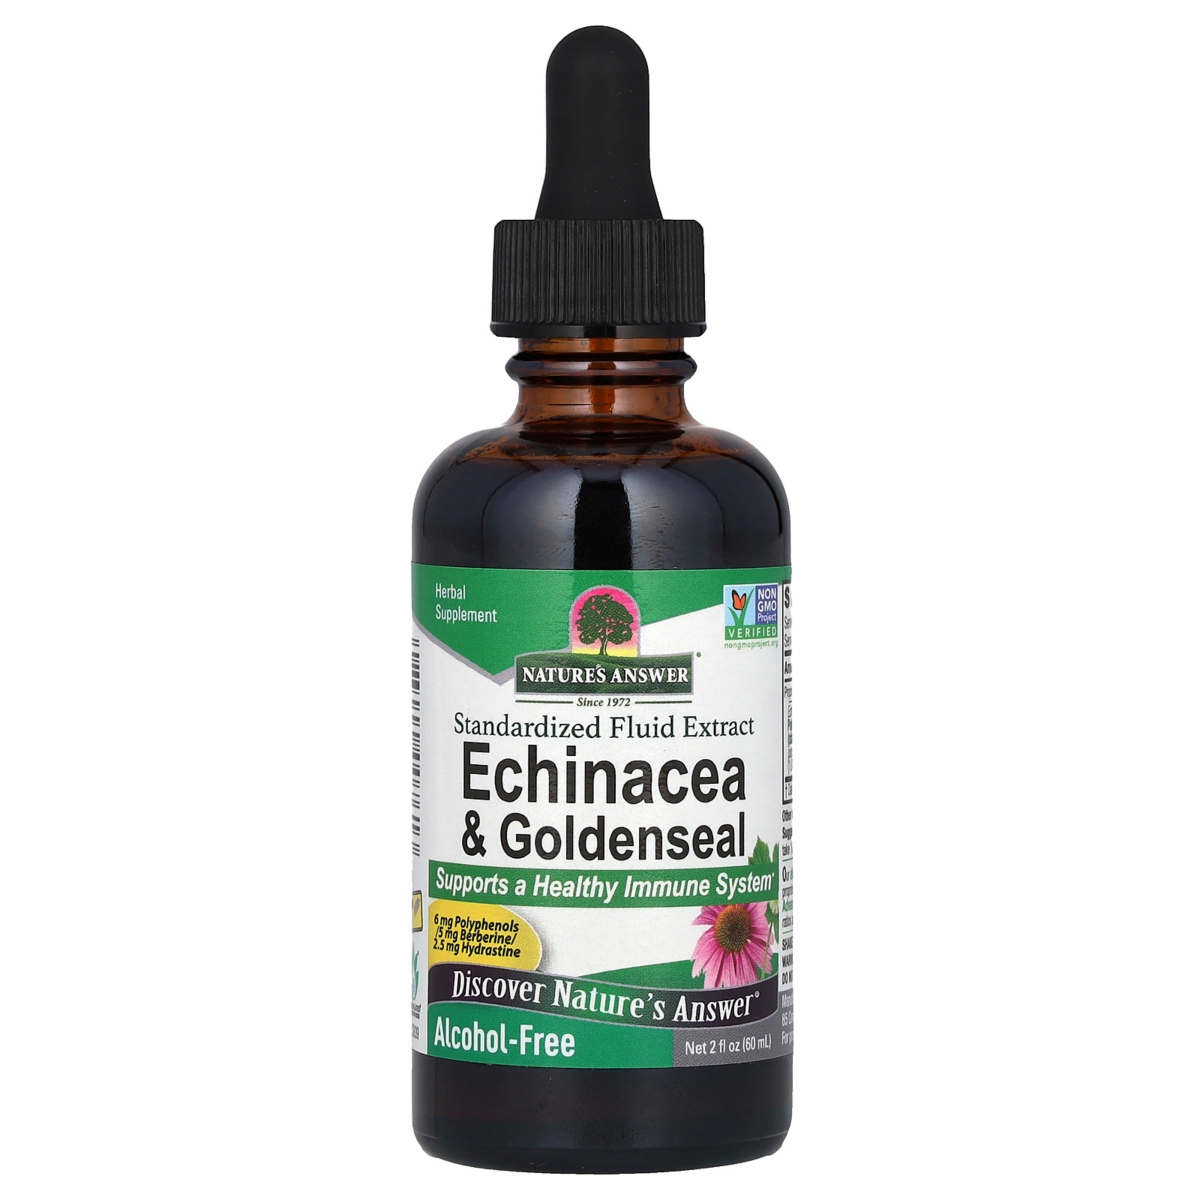 Echinacea & Goldenseal Standardized Fluid Extract Alcohol-Free - 2 fl oz - Assorted Pre-pack (See Table